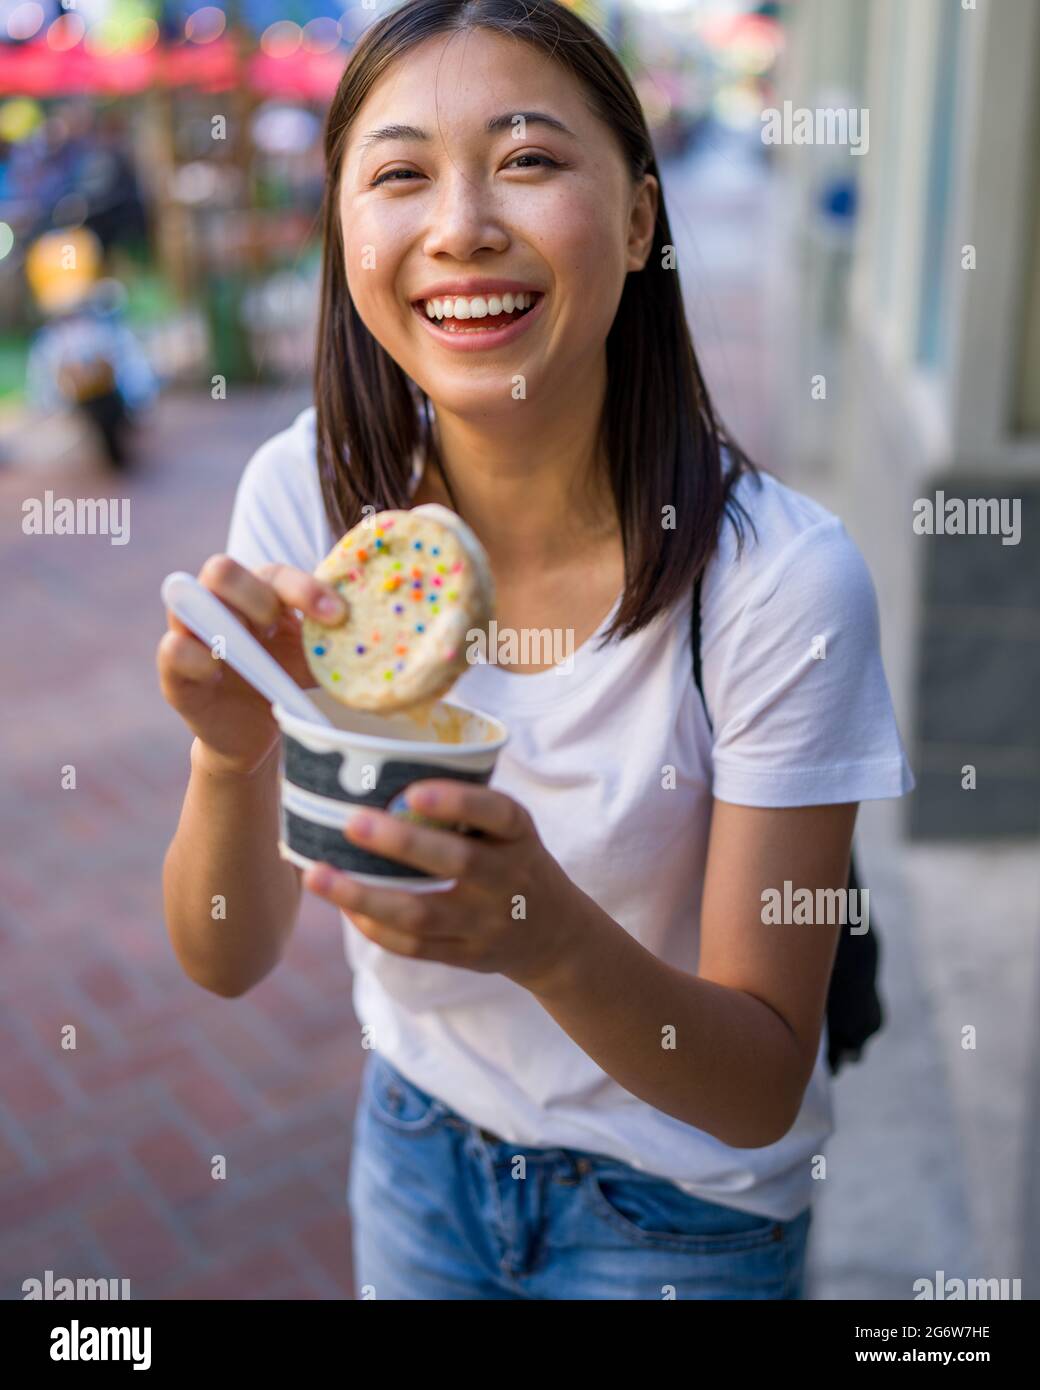 Happy Young Asian Woman Eating an Ice Cream Sandwich in an Urban Setting Stock Photo